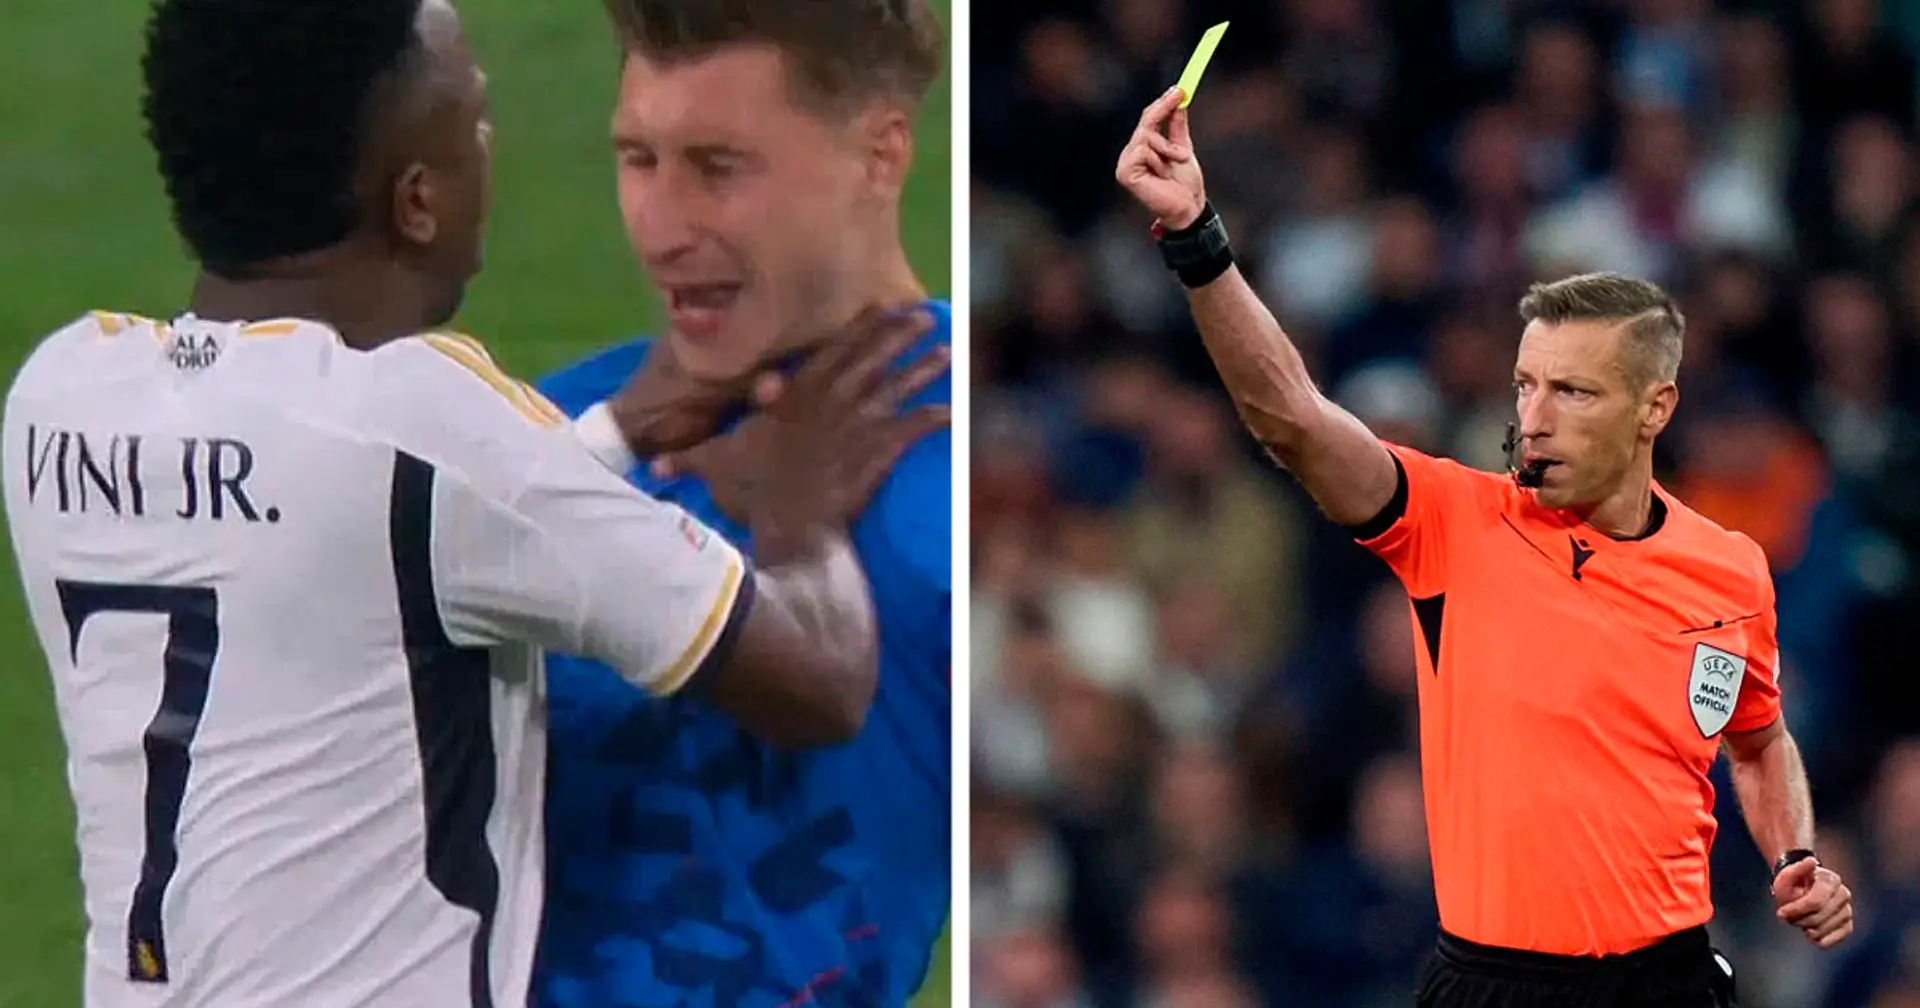 Referee 'shows mercy' by giving Vini only a yellow card for the throat grab - he could have been sent off